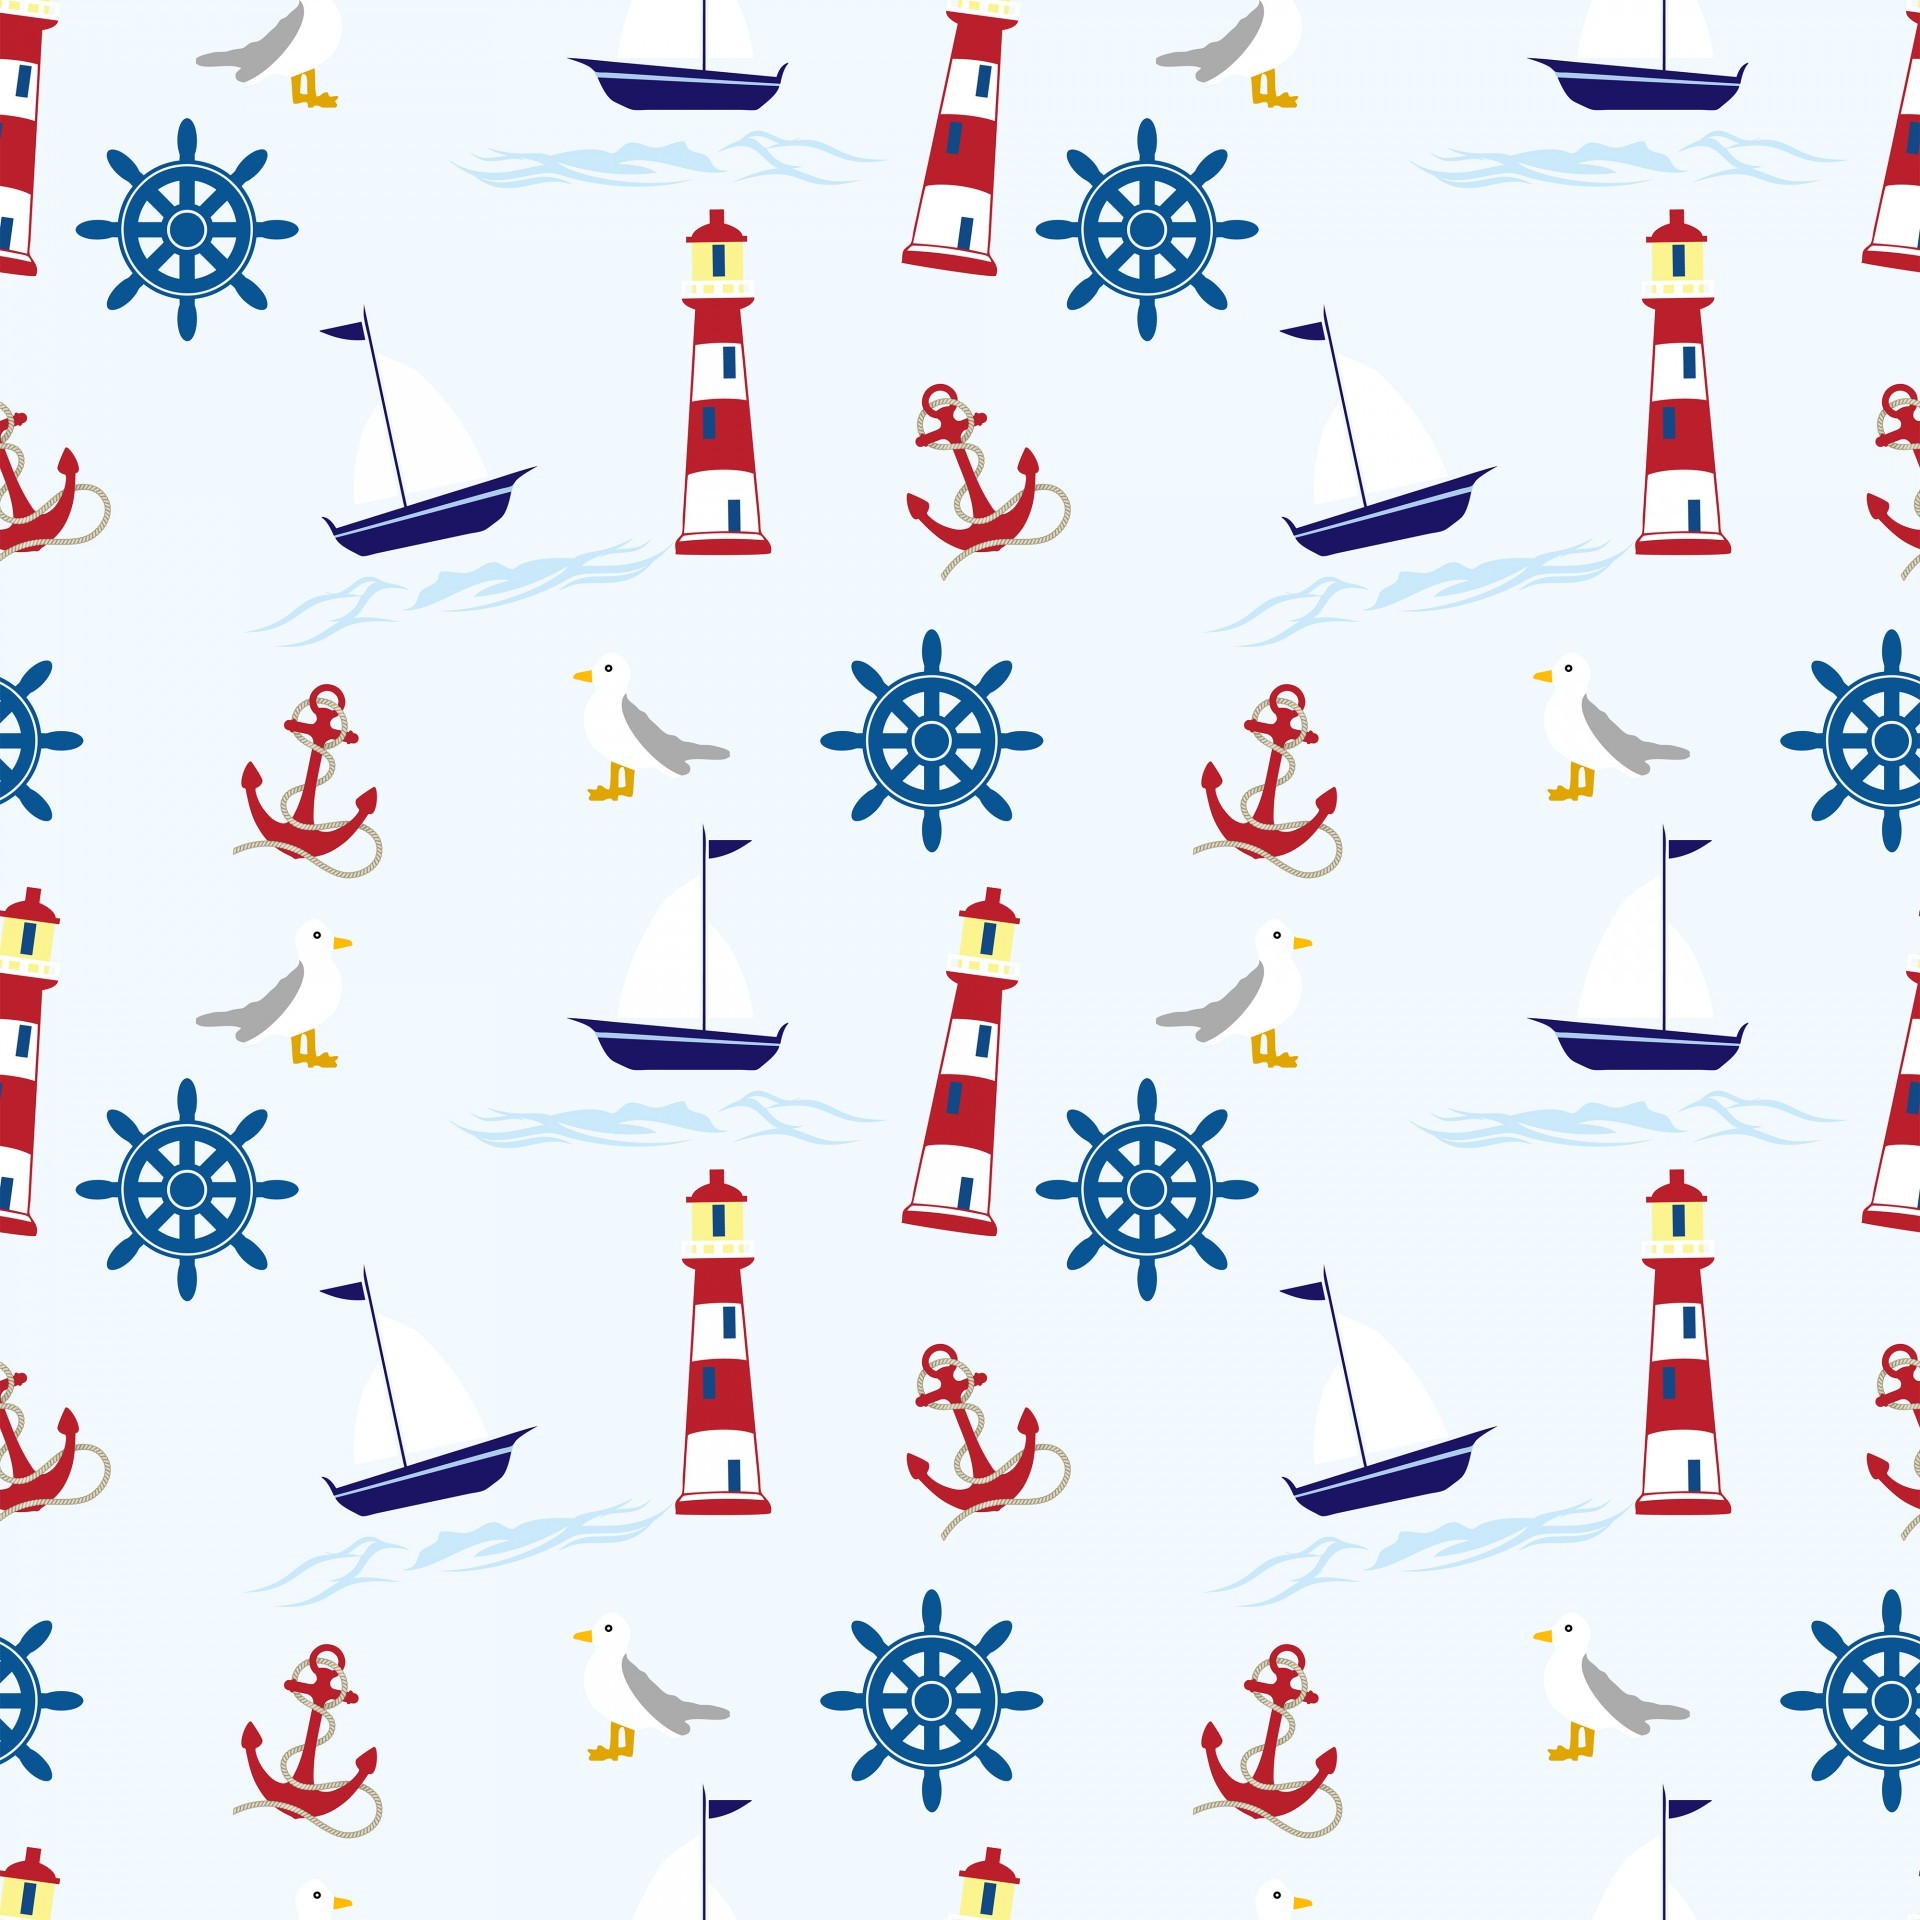 1920x1920 CM – Set of nautical badge and patterns – 55470 Nautical Star Paper Pieced  Quilt by Gail Kolcz. A gorgeous nautical … More free star quilt patterns: